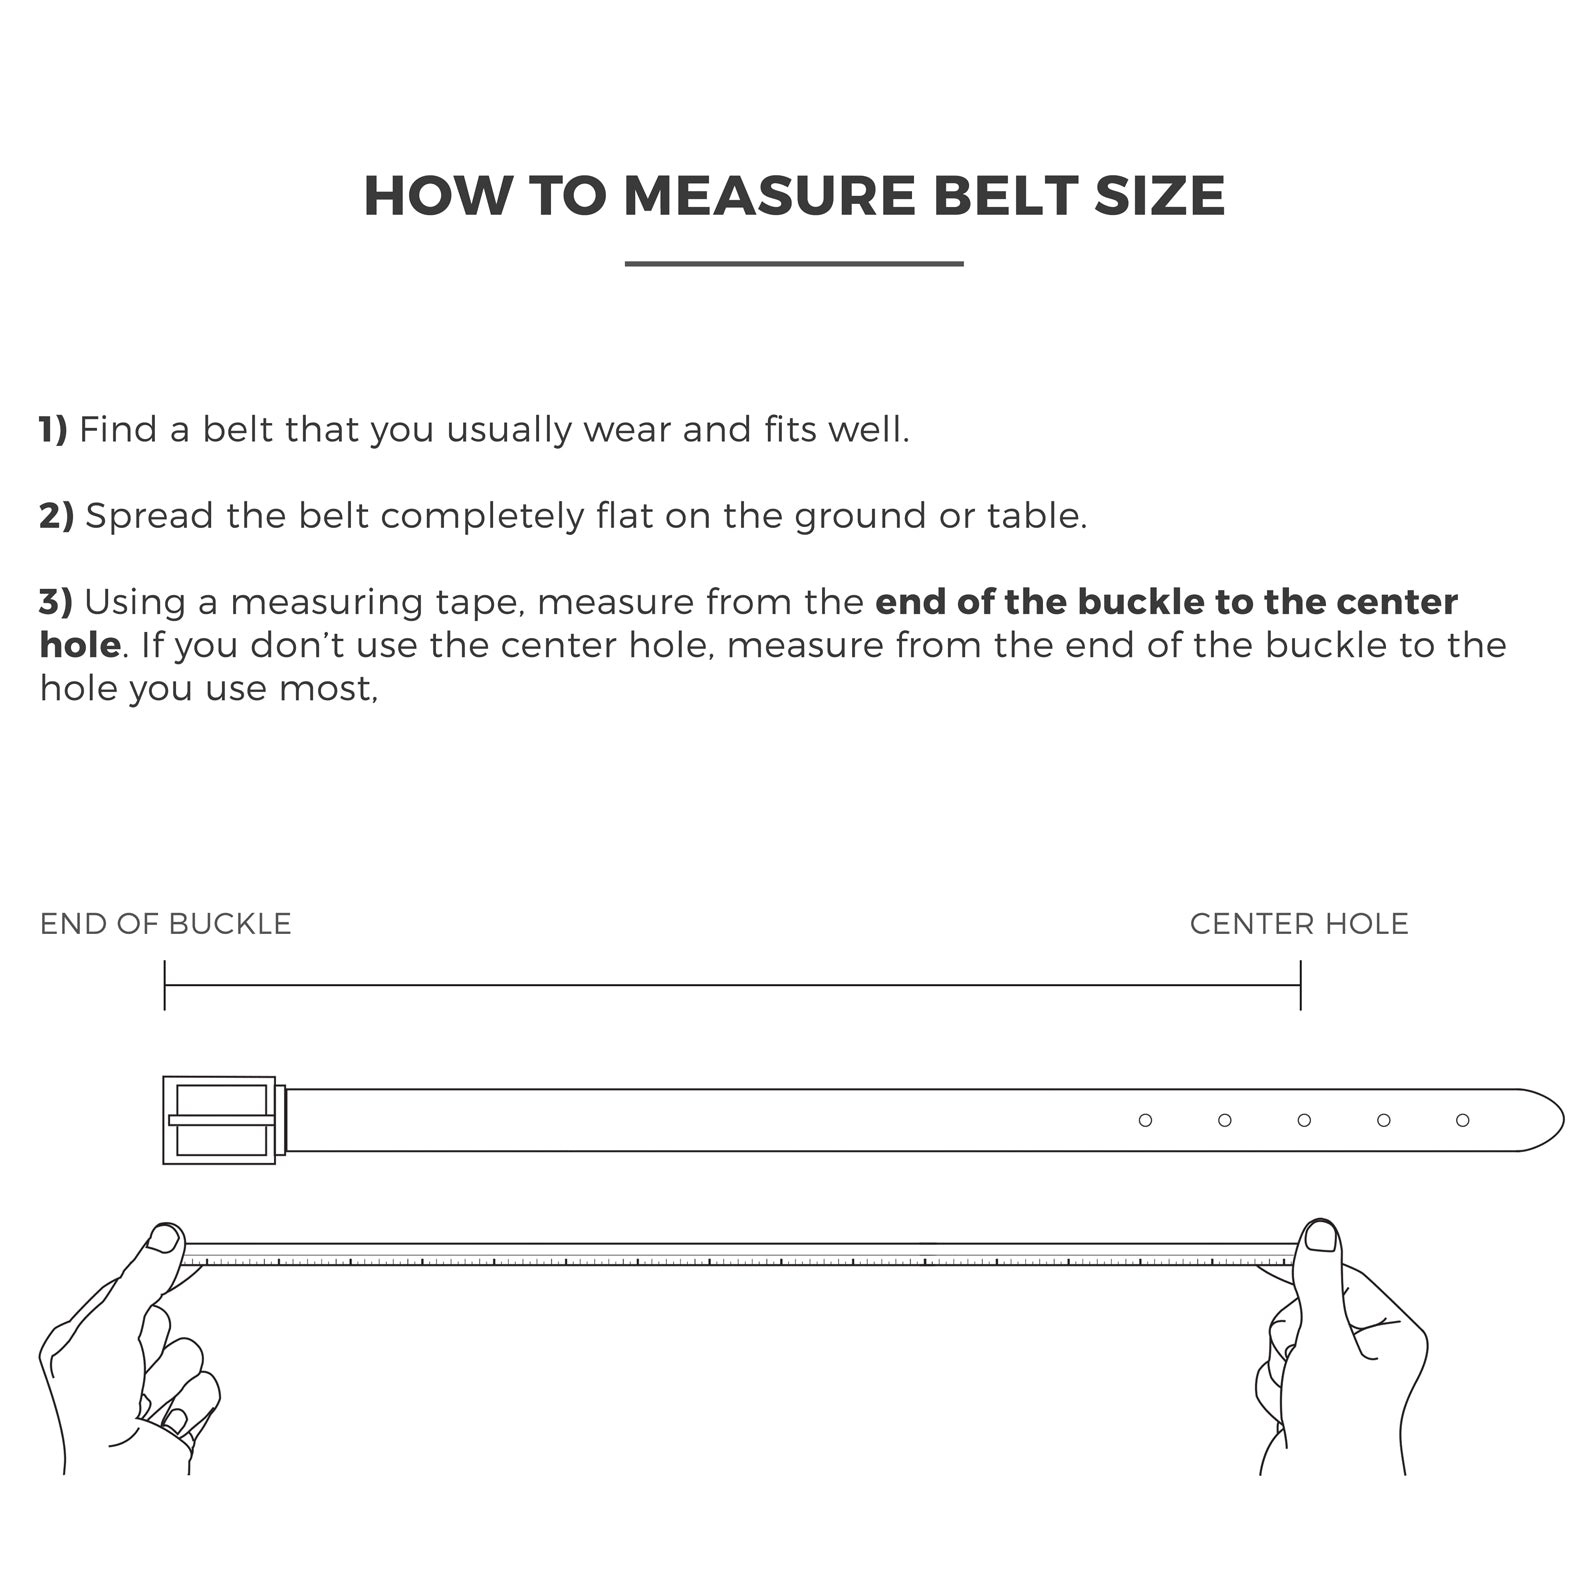 How to measure belt size